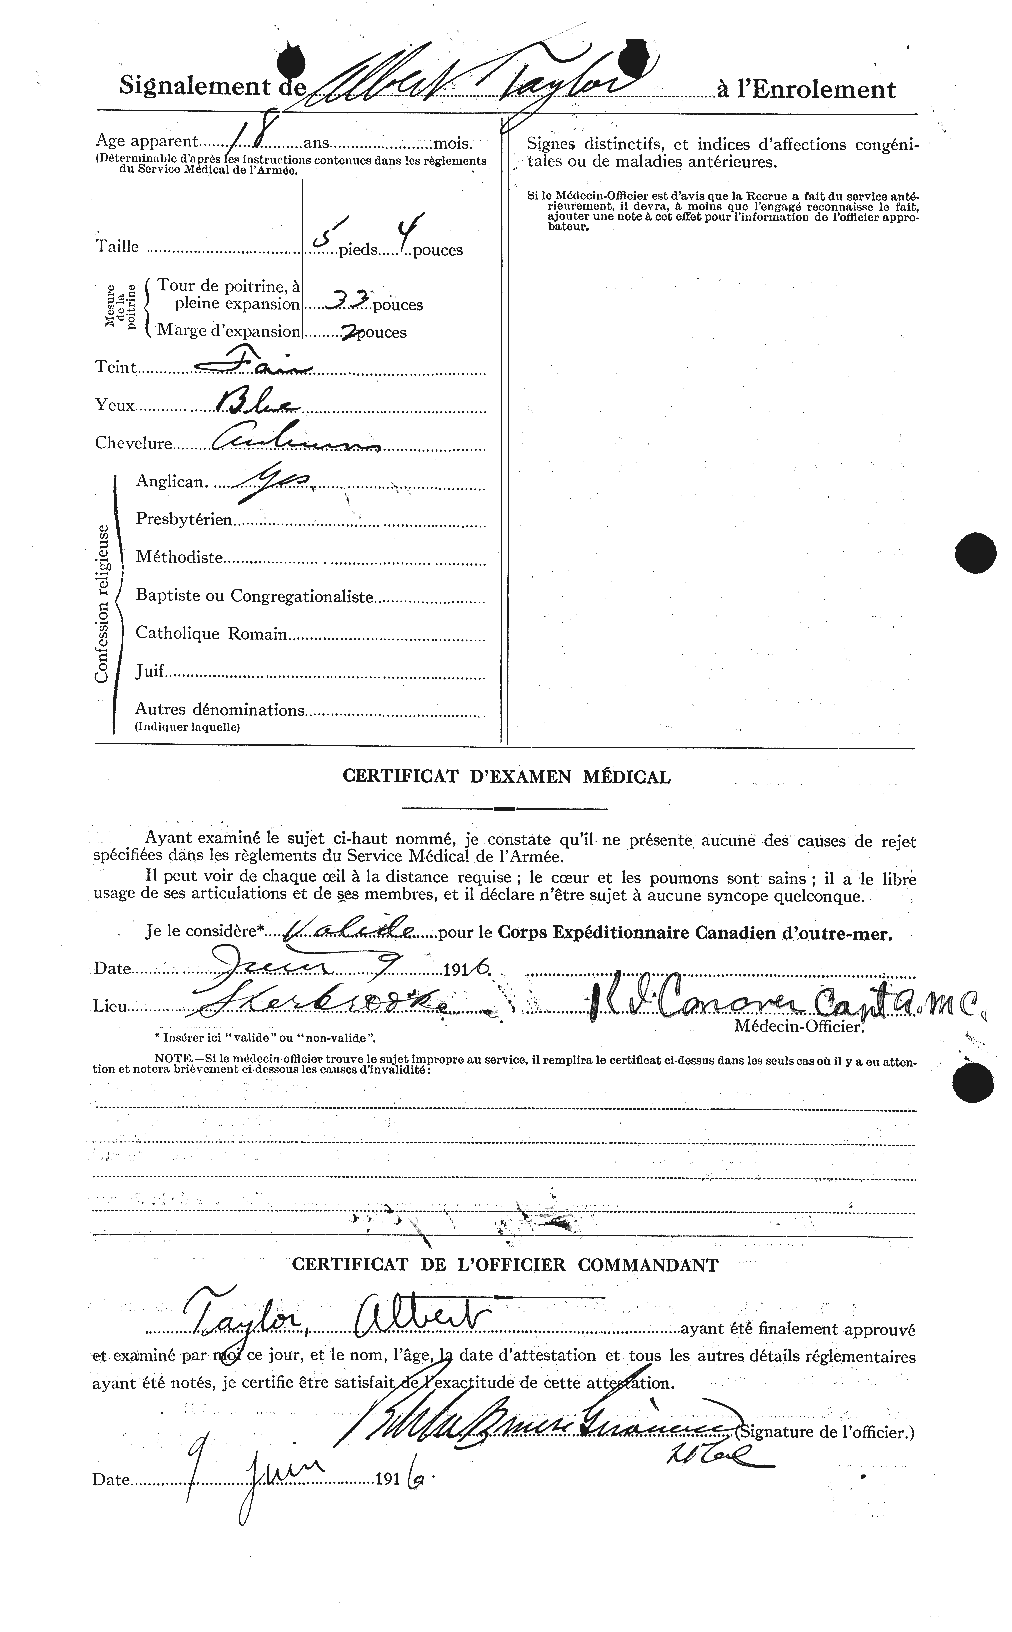 Personnel Records of the First World War - CEF 626090b